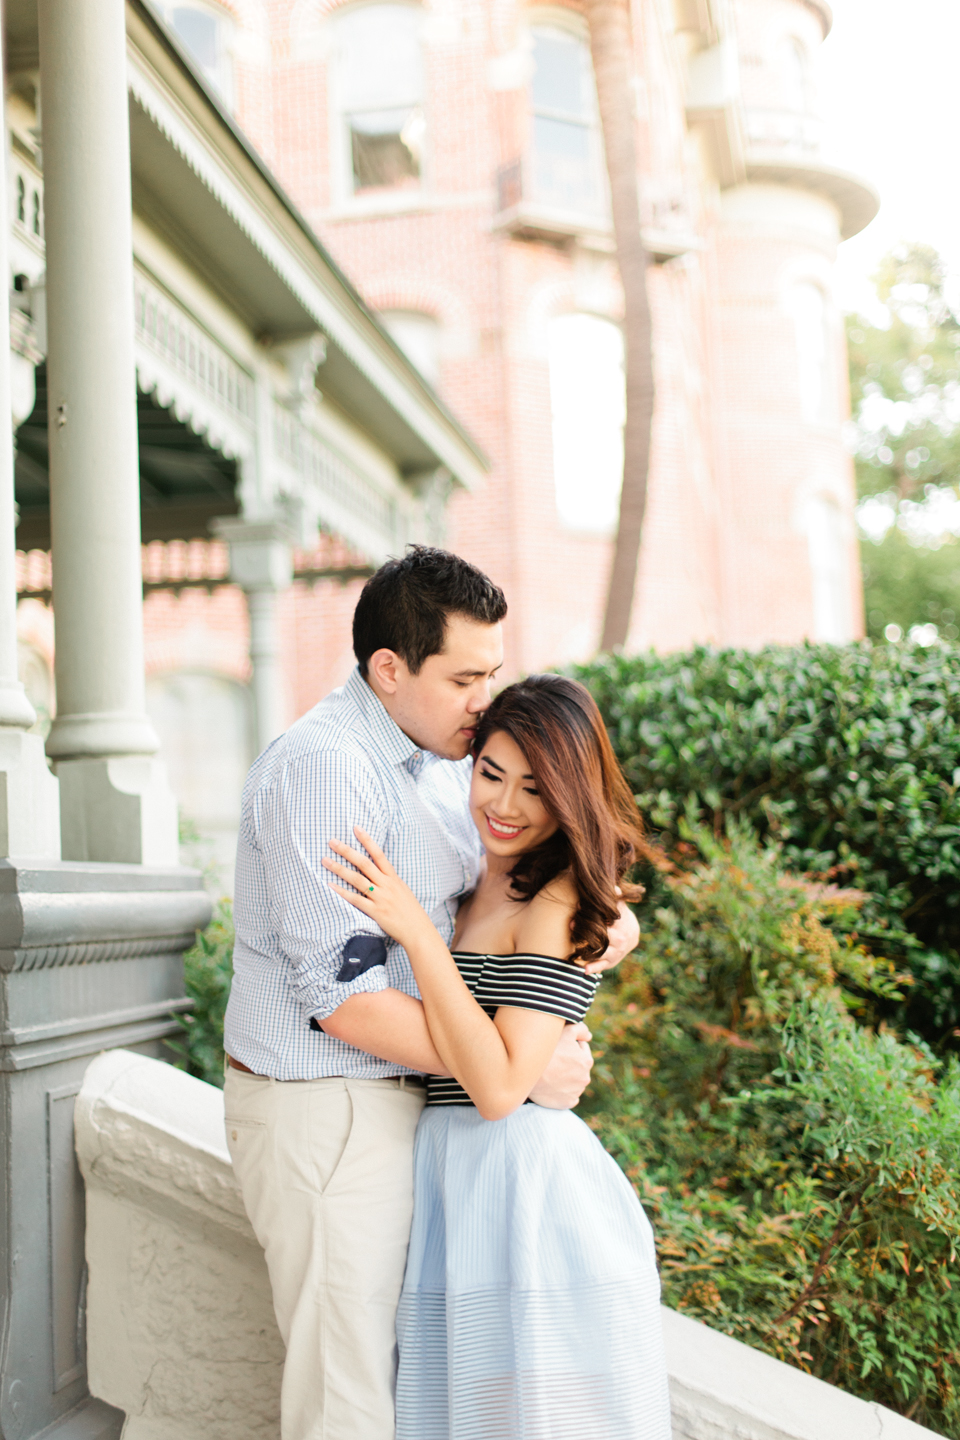 Image of engagement portraits on the steps of the Henry B Plant museum in Tampa, Florida.  The couple is in a romantic embrace.  